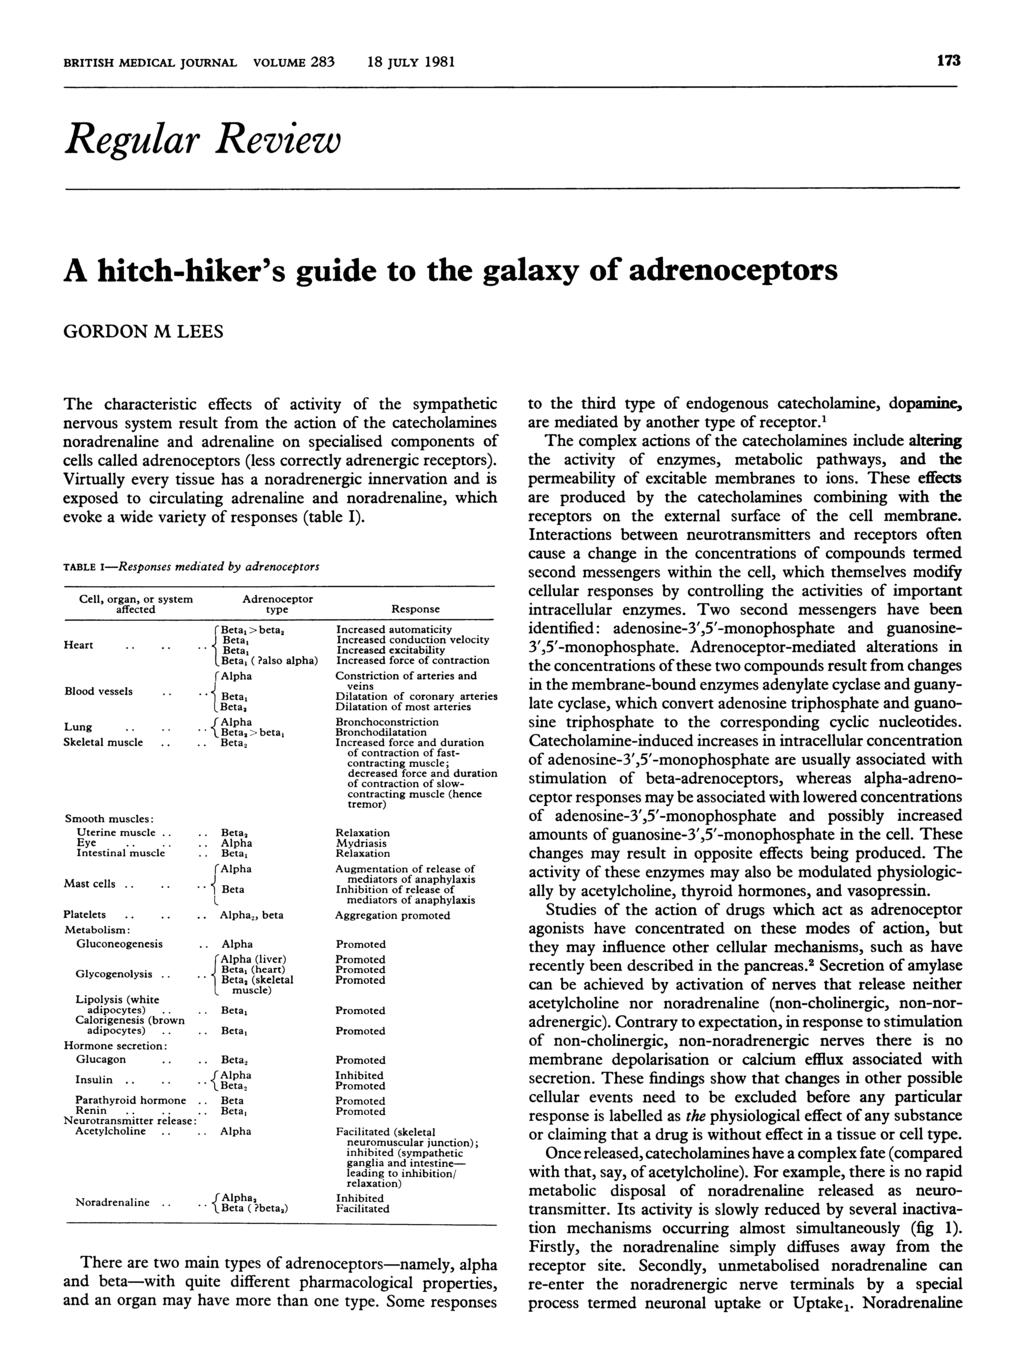 Regular Review A hitch-hiker's guide to the galaxy of adrenoceptors GORDON M LEES The characteristic effects of activity of the sympathetic nervous system result from the action of the catecholamines